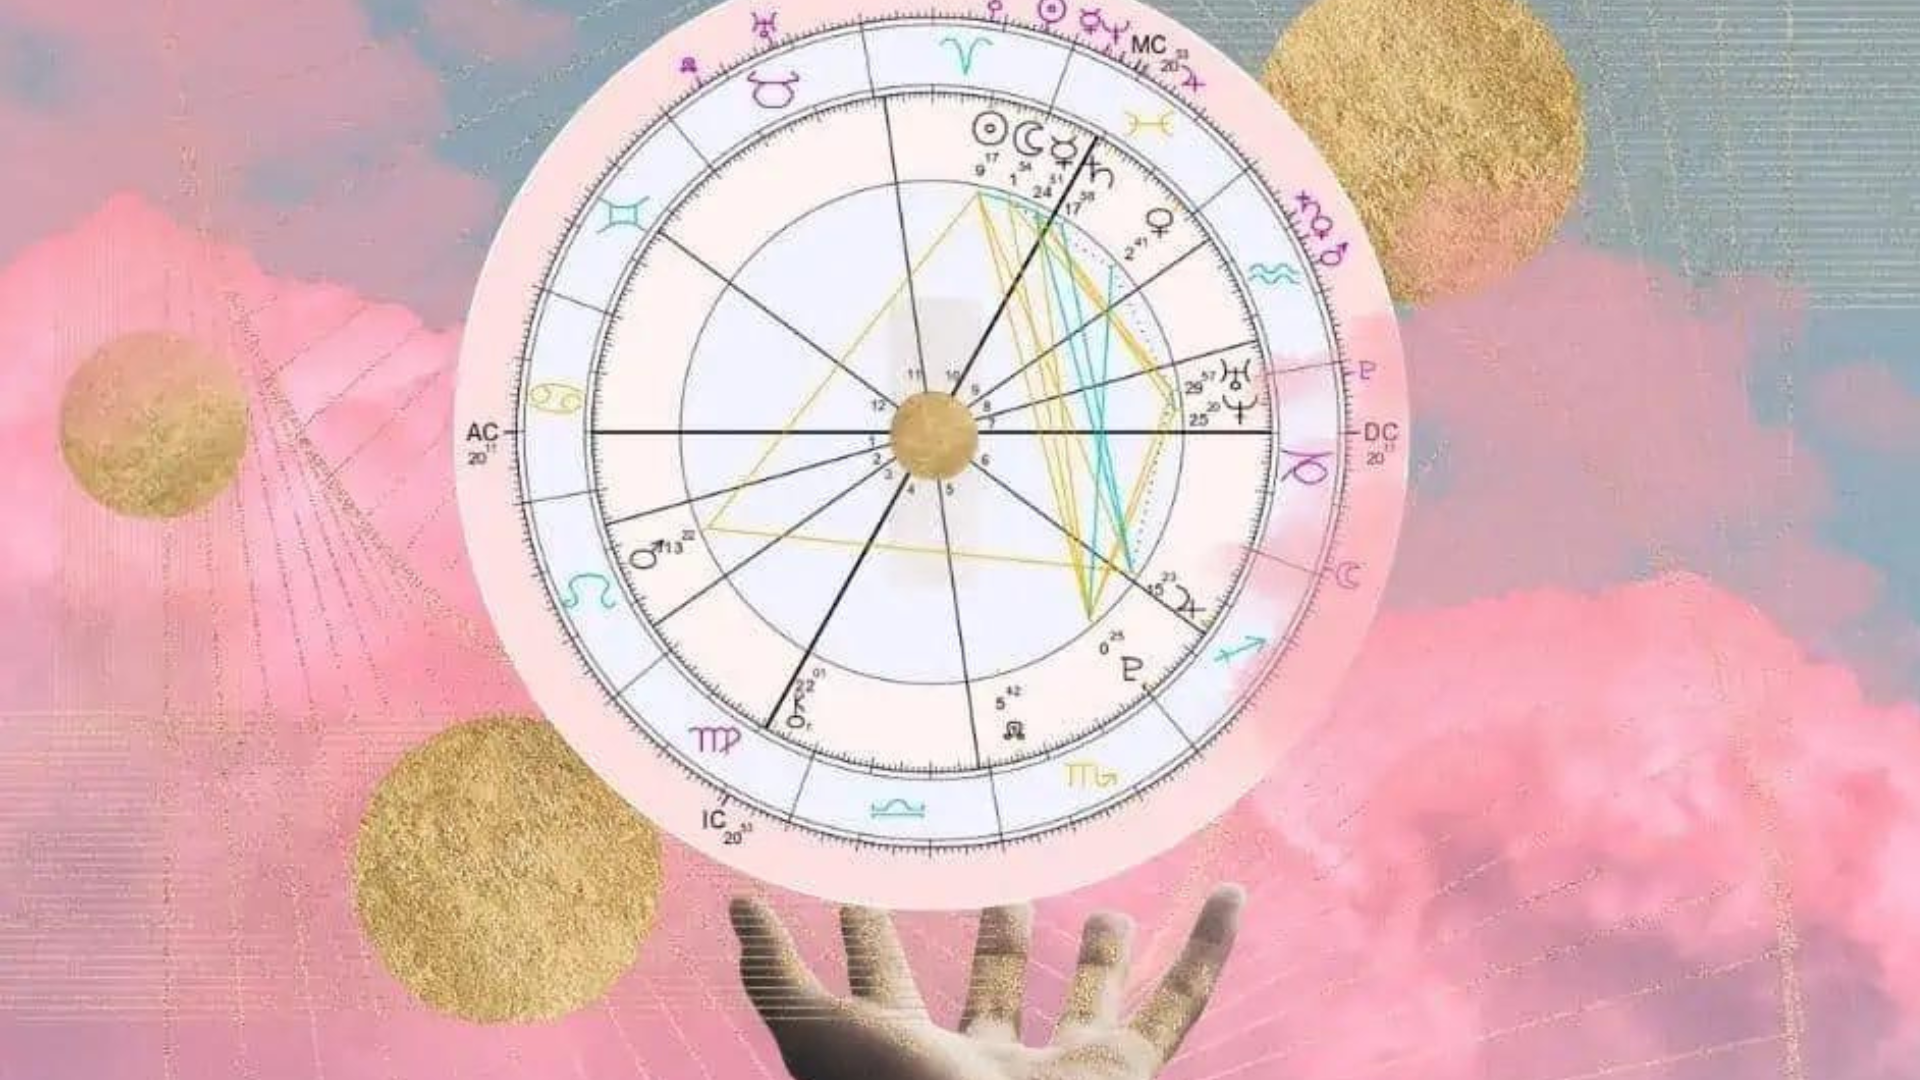 A hand seemingly lifting an Ethereal Astrology Birth Chart